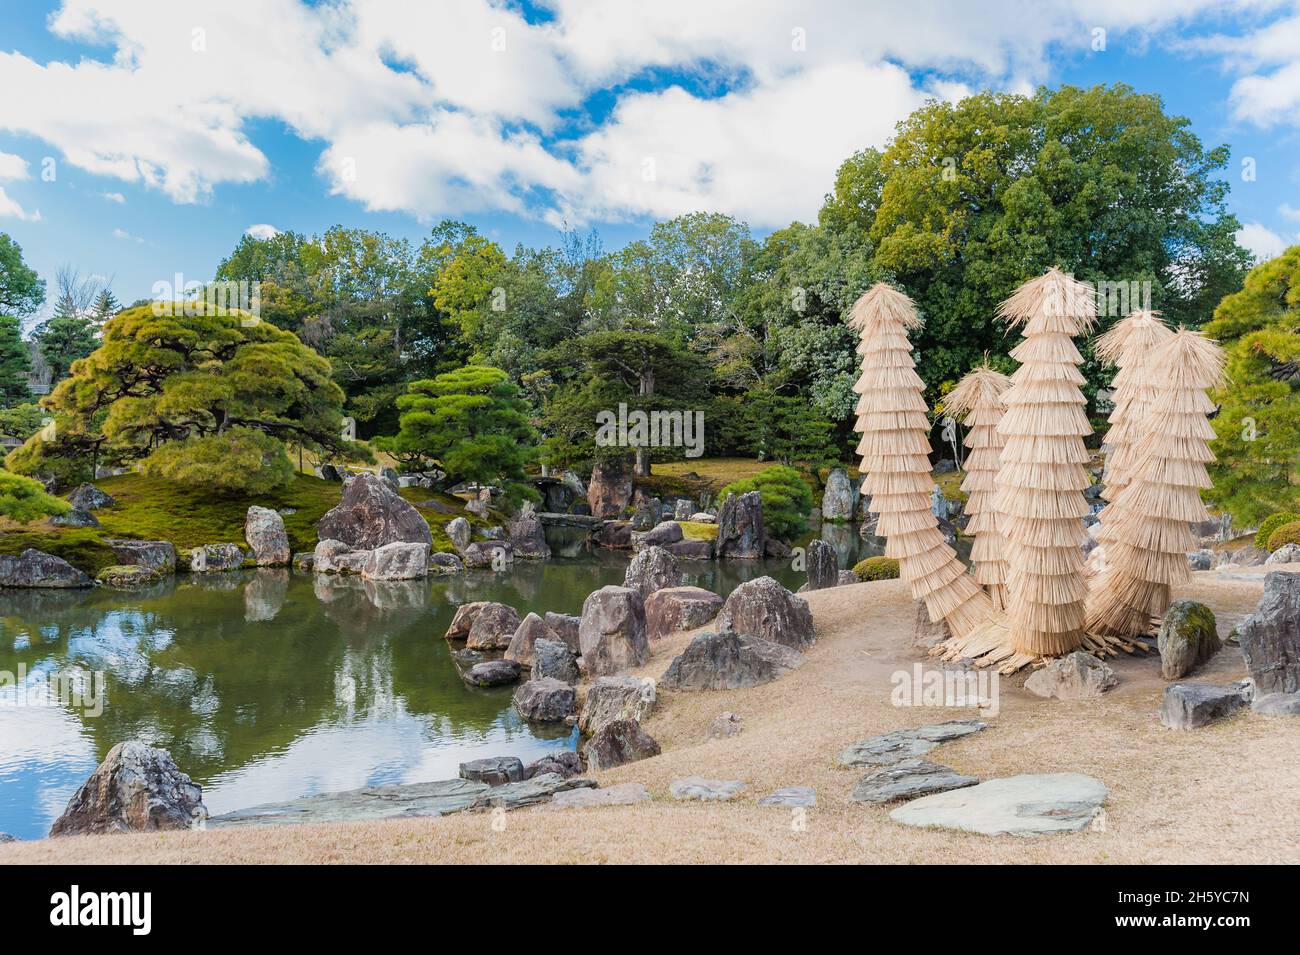 Beautiful, artistic straw structures adorn the spectacular and formal designs of the Nijo Castle imperial gardens in Kyoto, Japan. Stock Photo